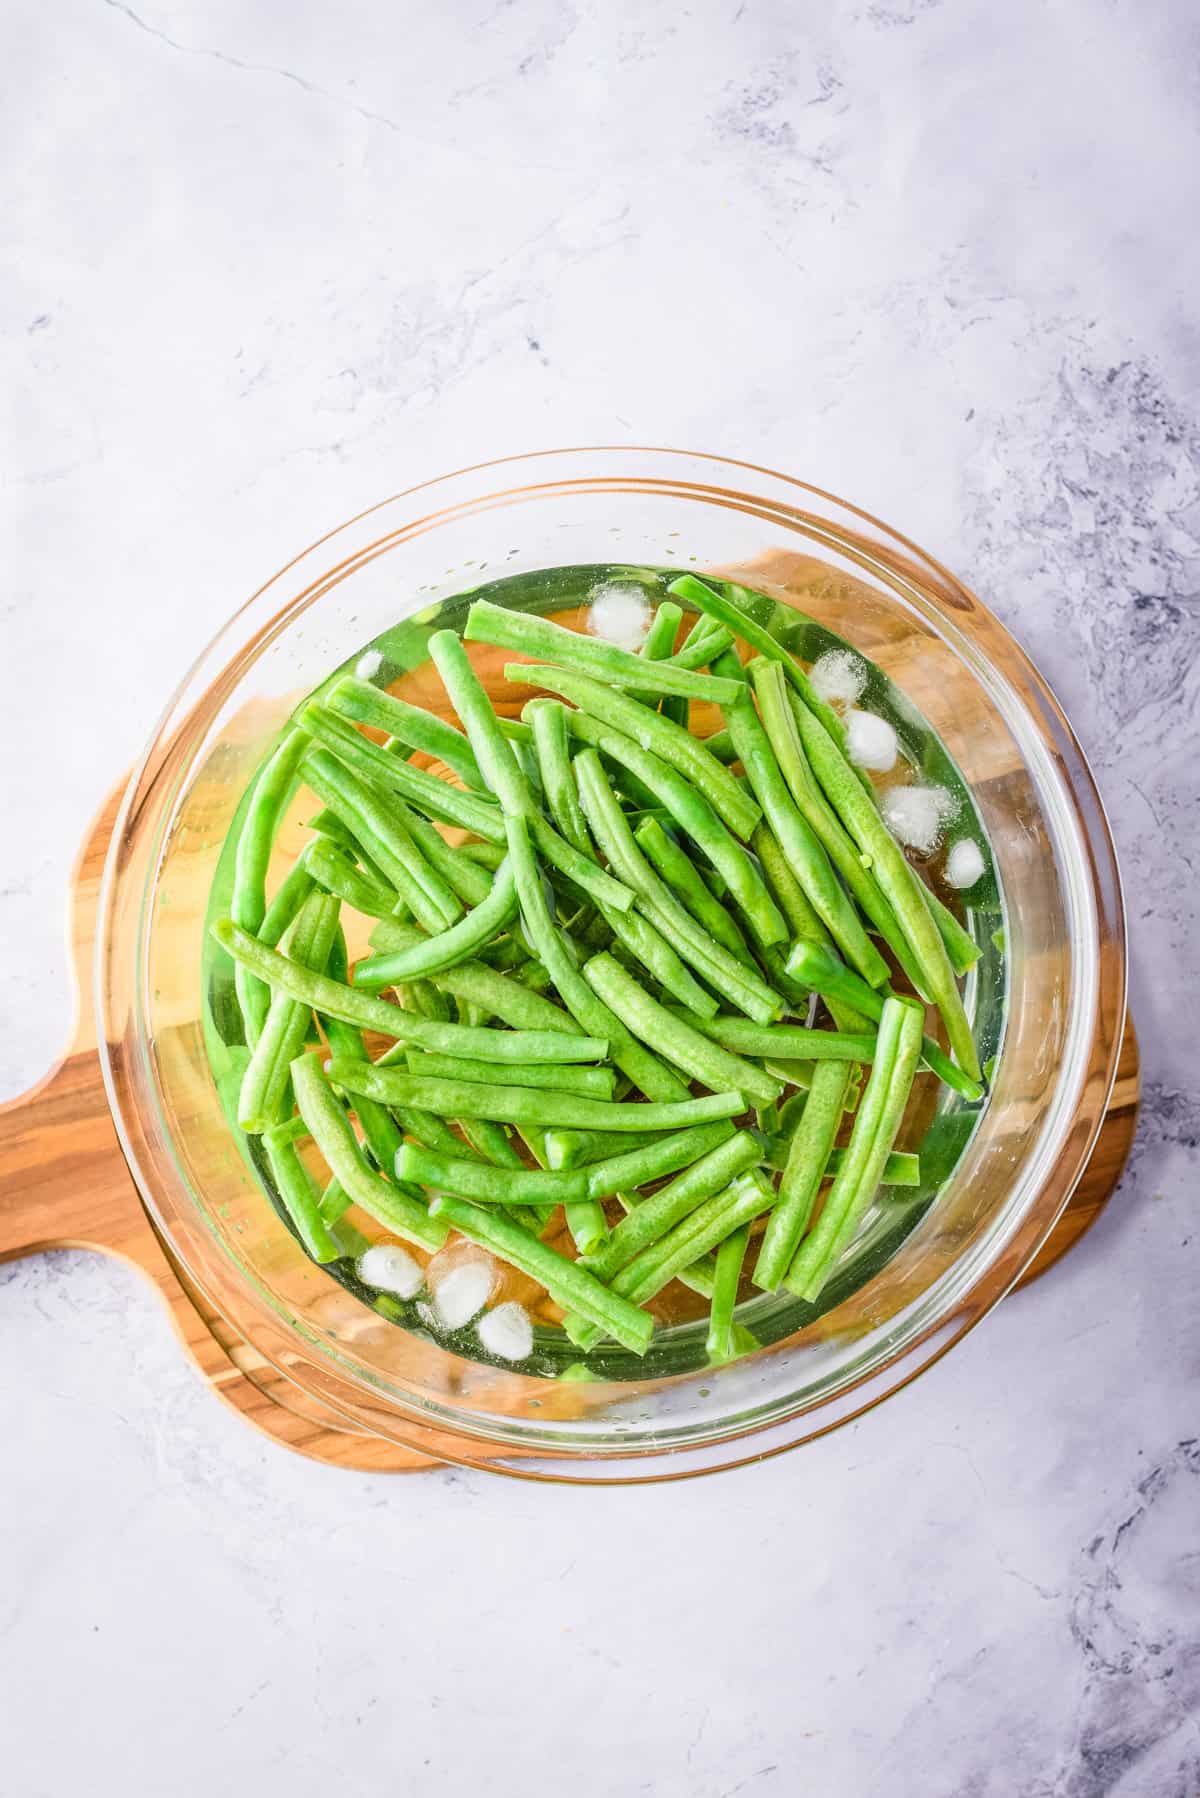 Overhead view of green beans in ice cold water in glass bowl.